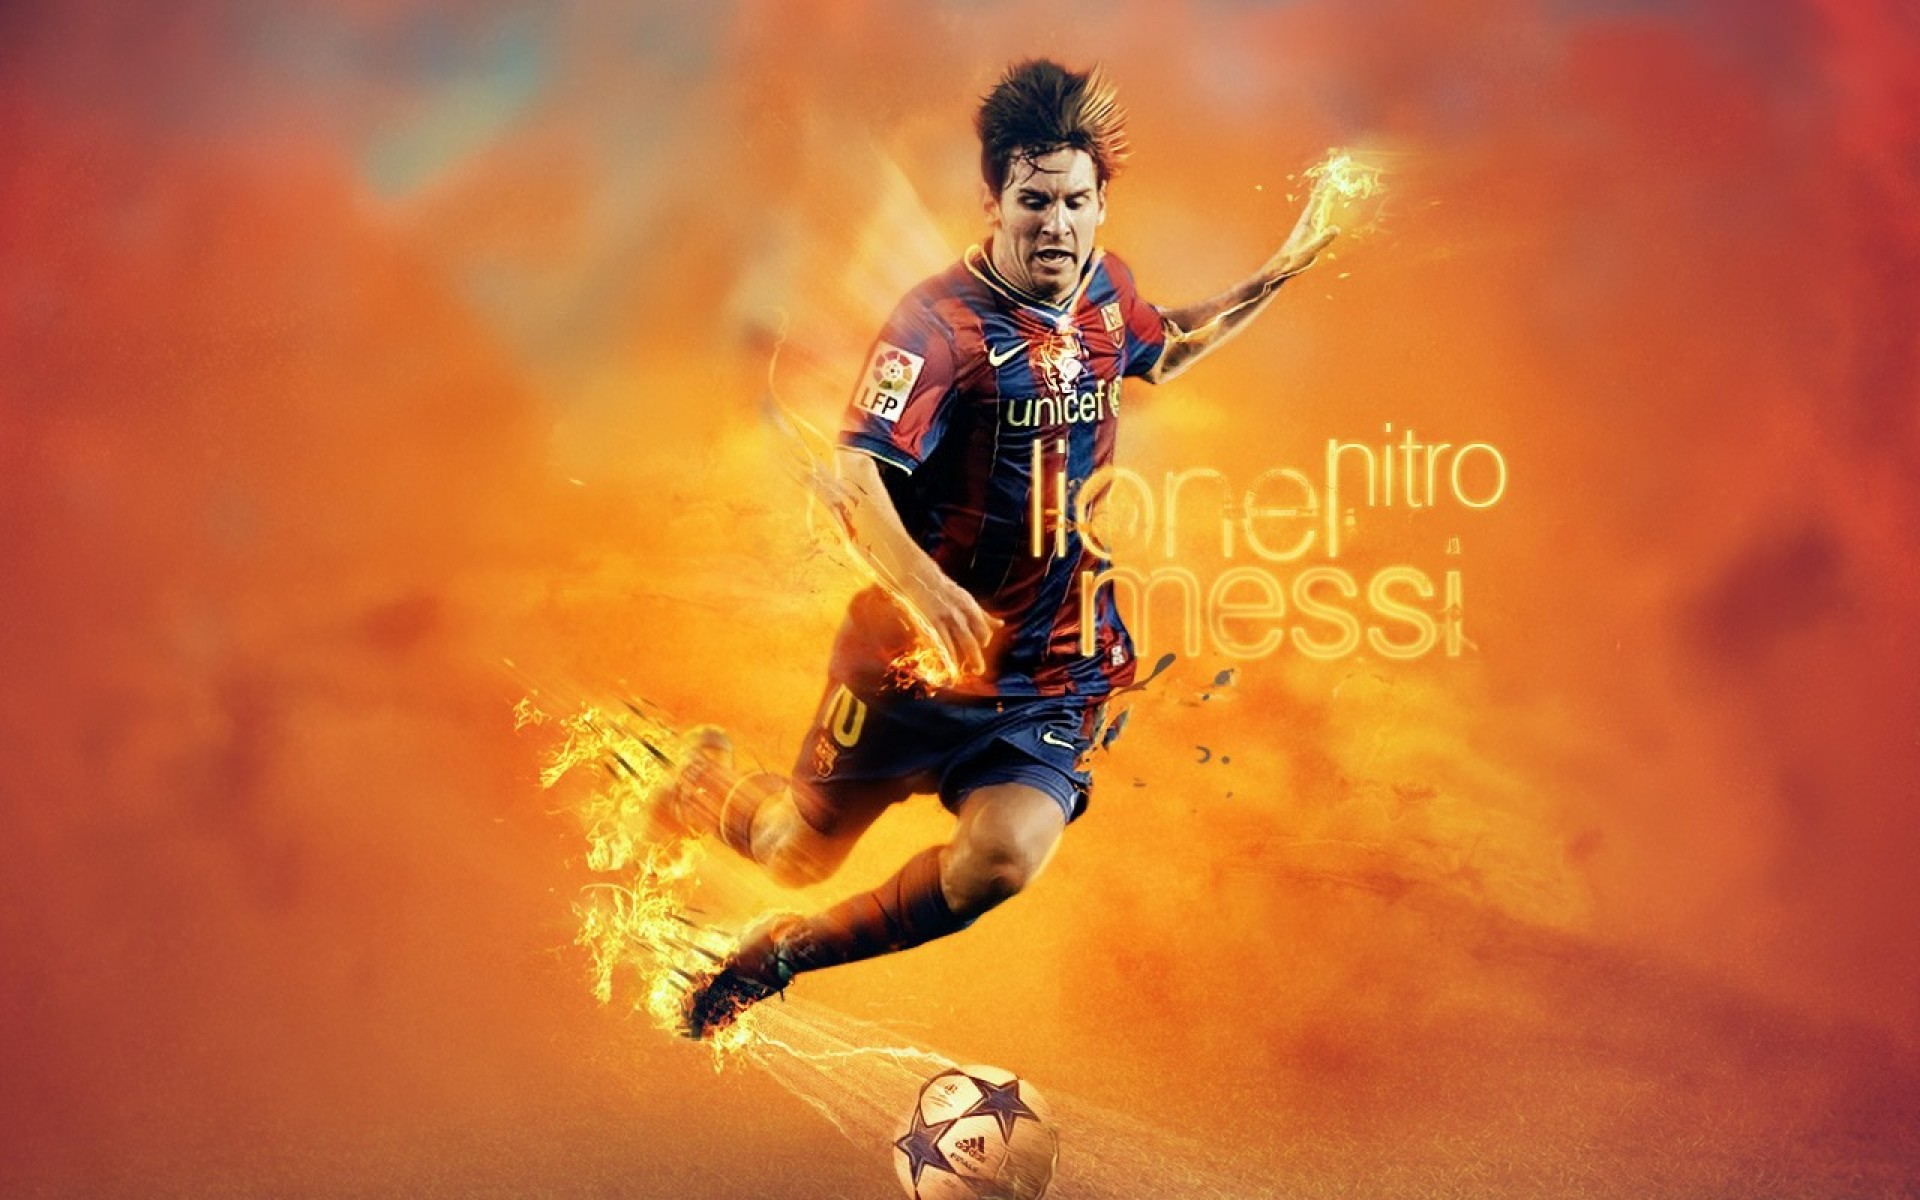 soccer player wallpapers,football player,player,football,photography,team sport